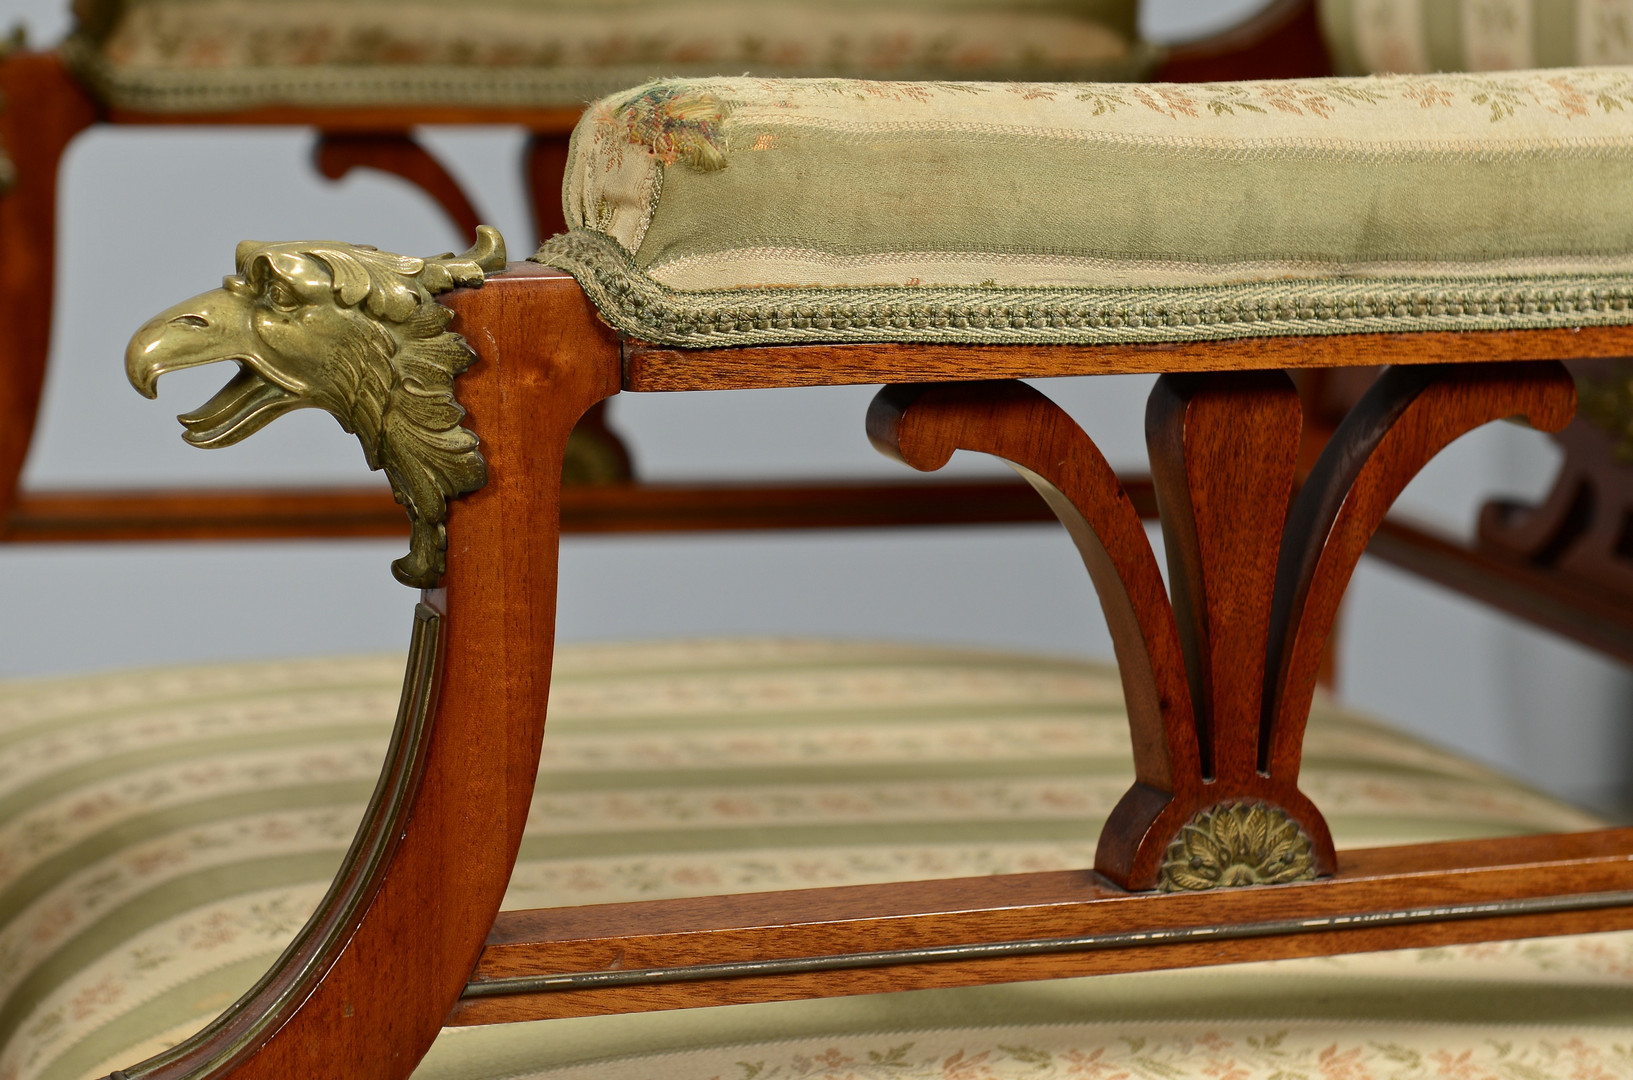 Lot 151: Pr. French Empire Style Armchairs